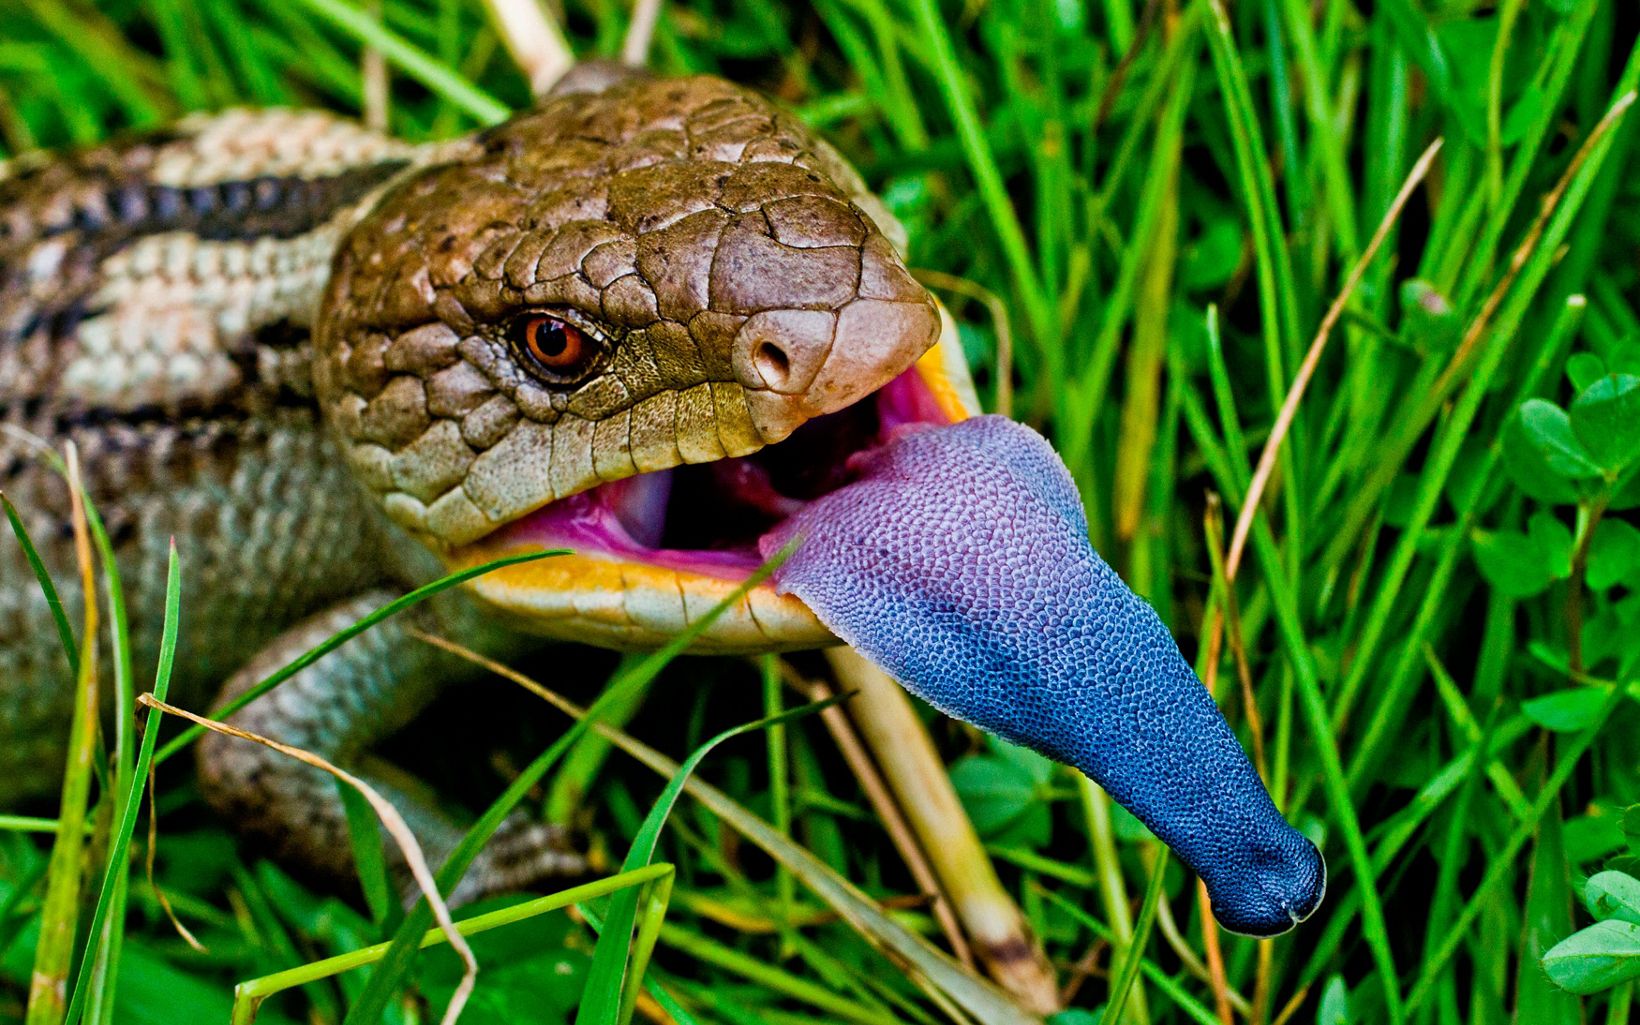 the large blue tongue is used as a bluff-warning to potential enemies